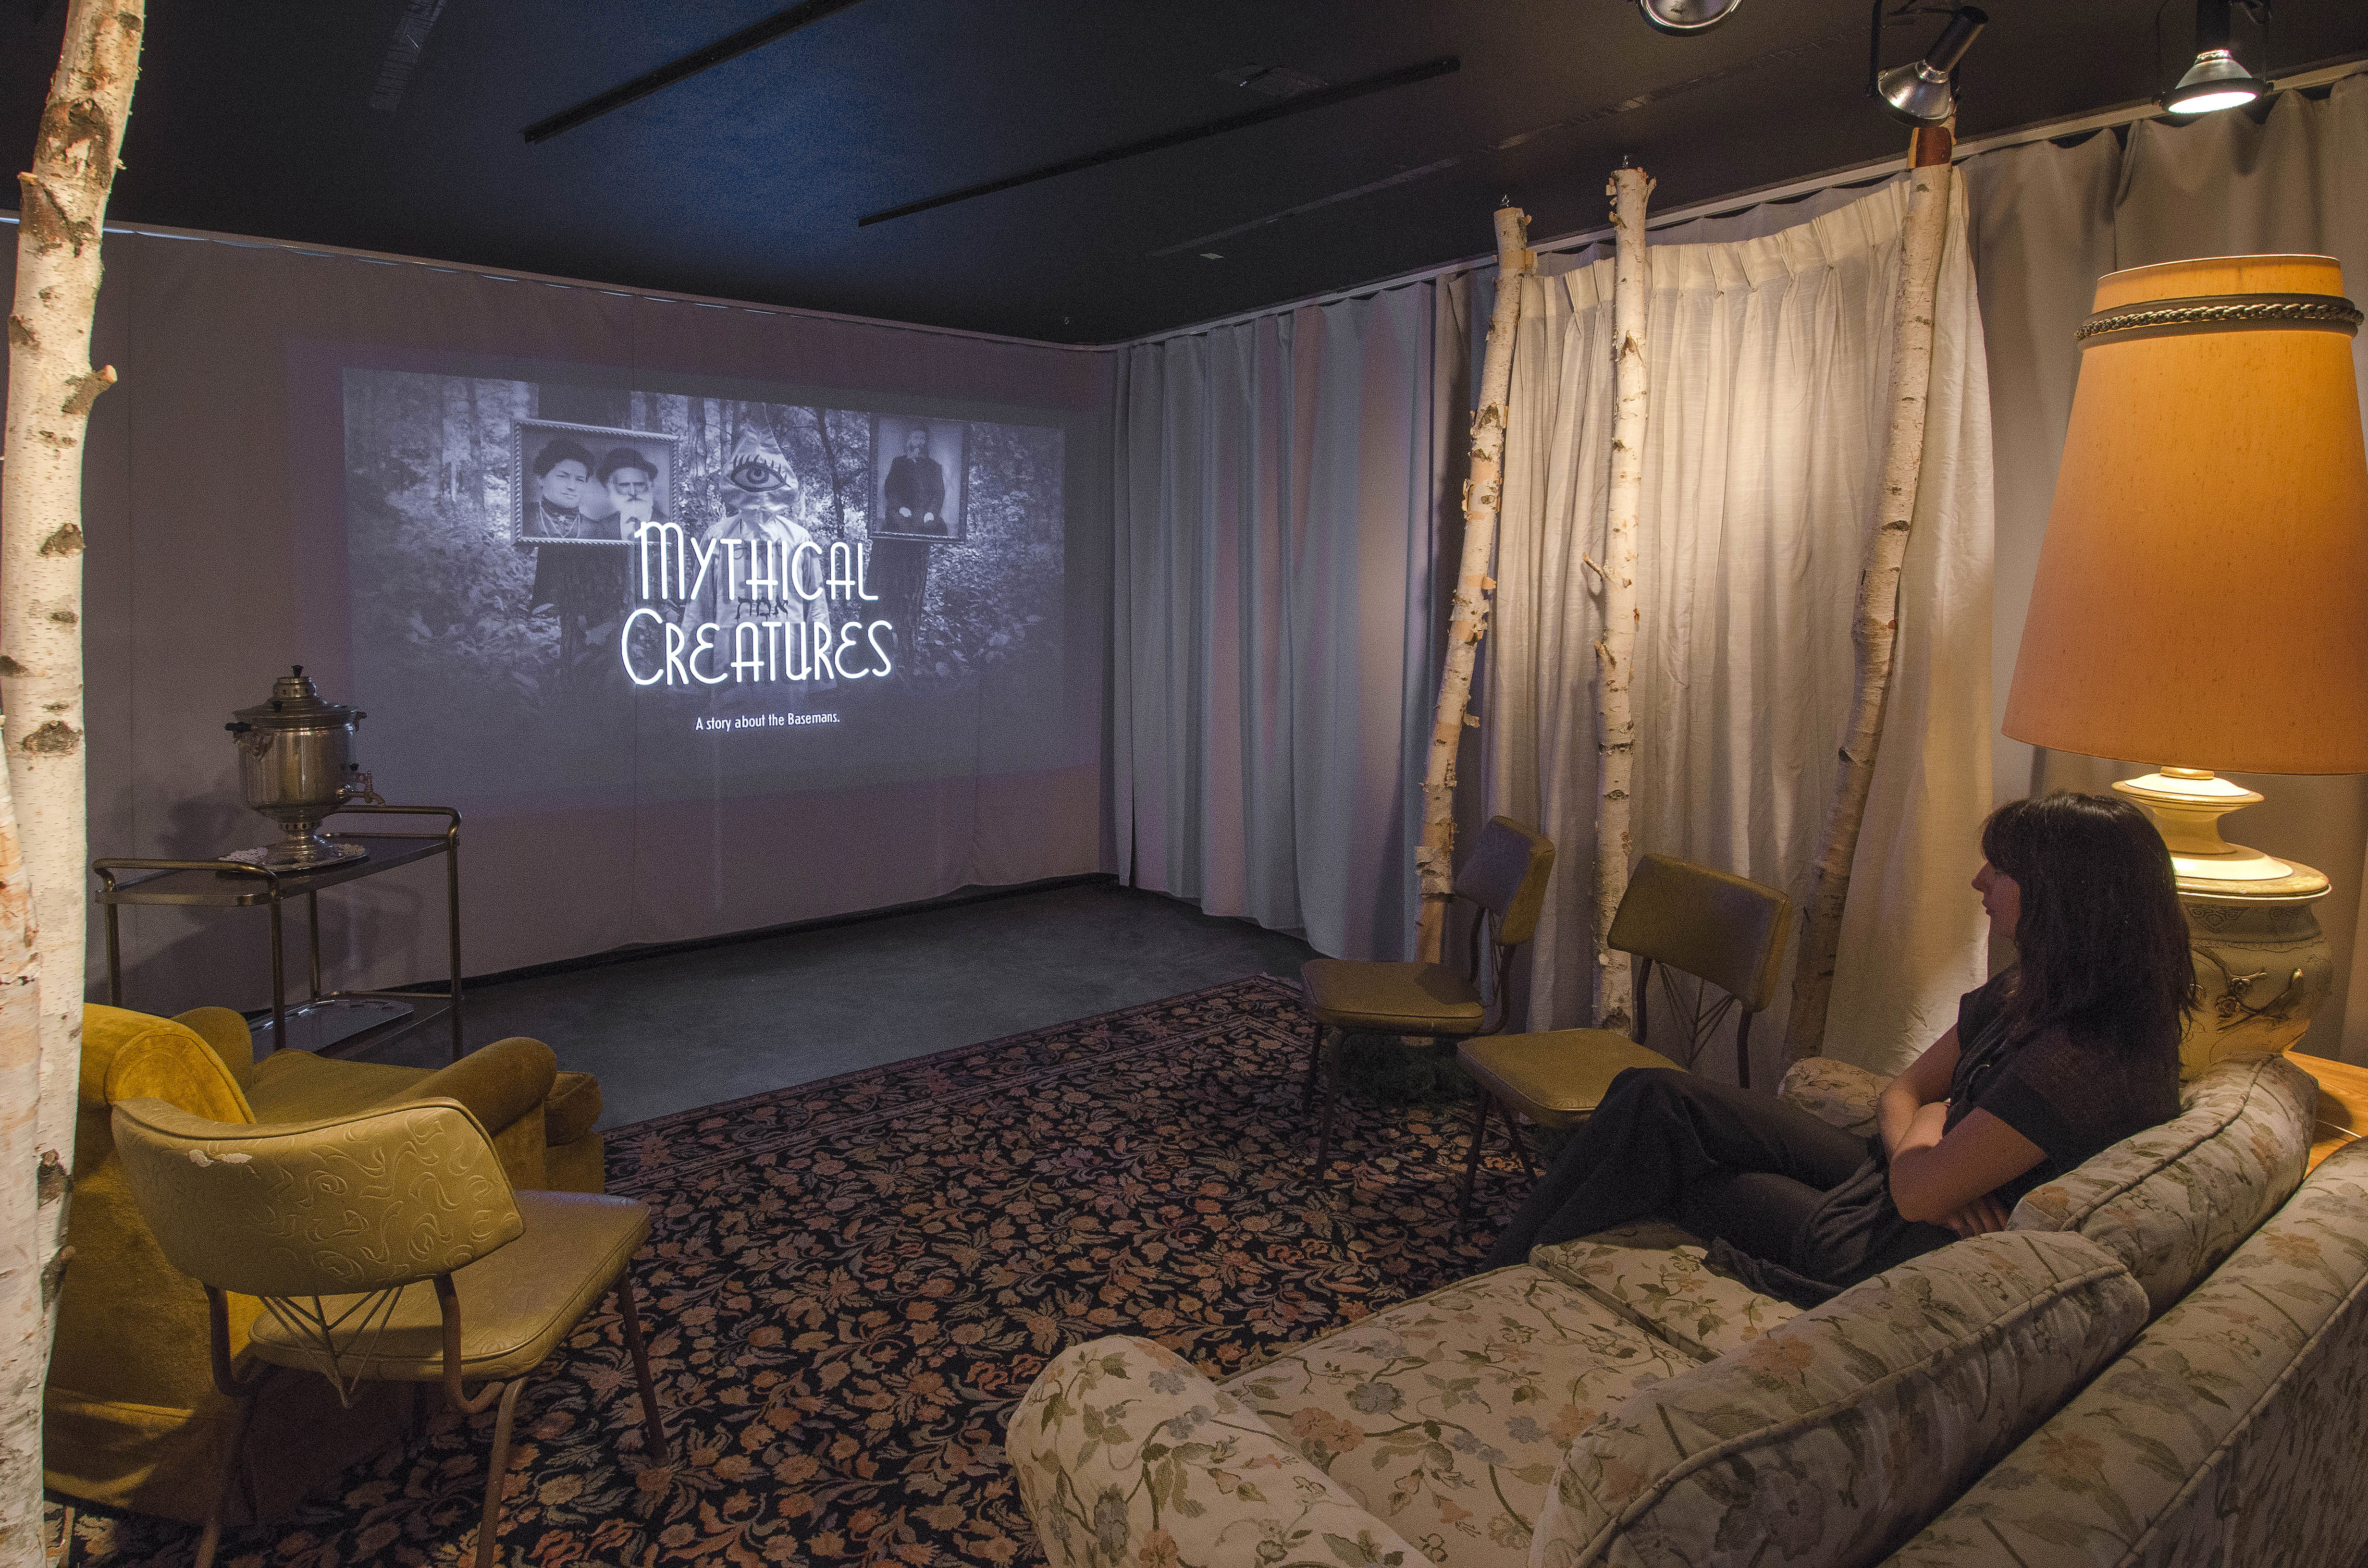 Image: A woman sits on a couch watching a film by projector called "Mythical Creatures".